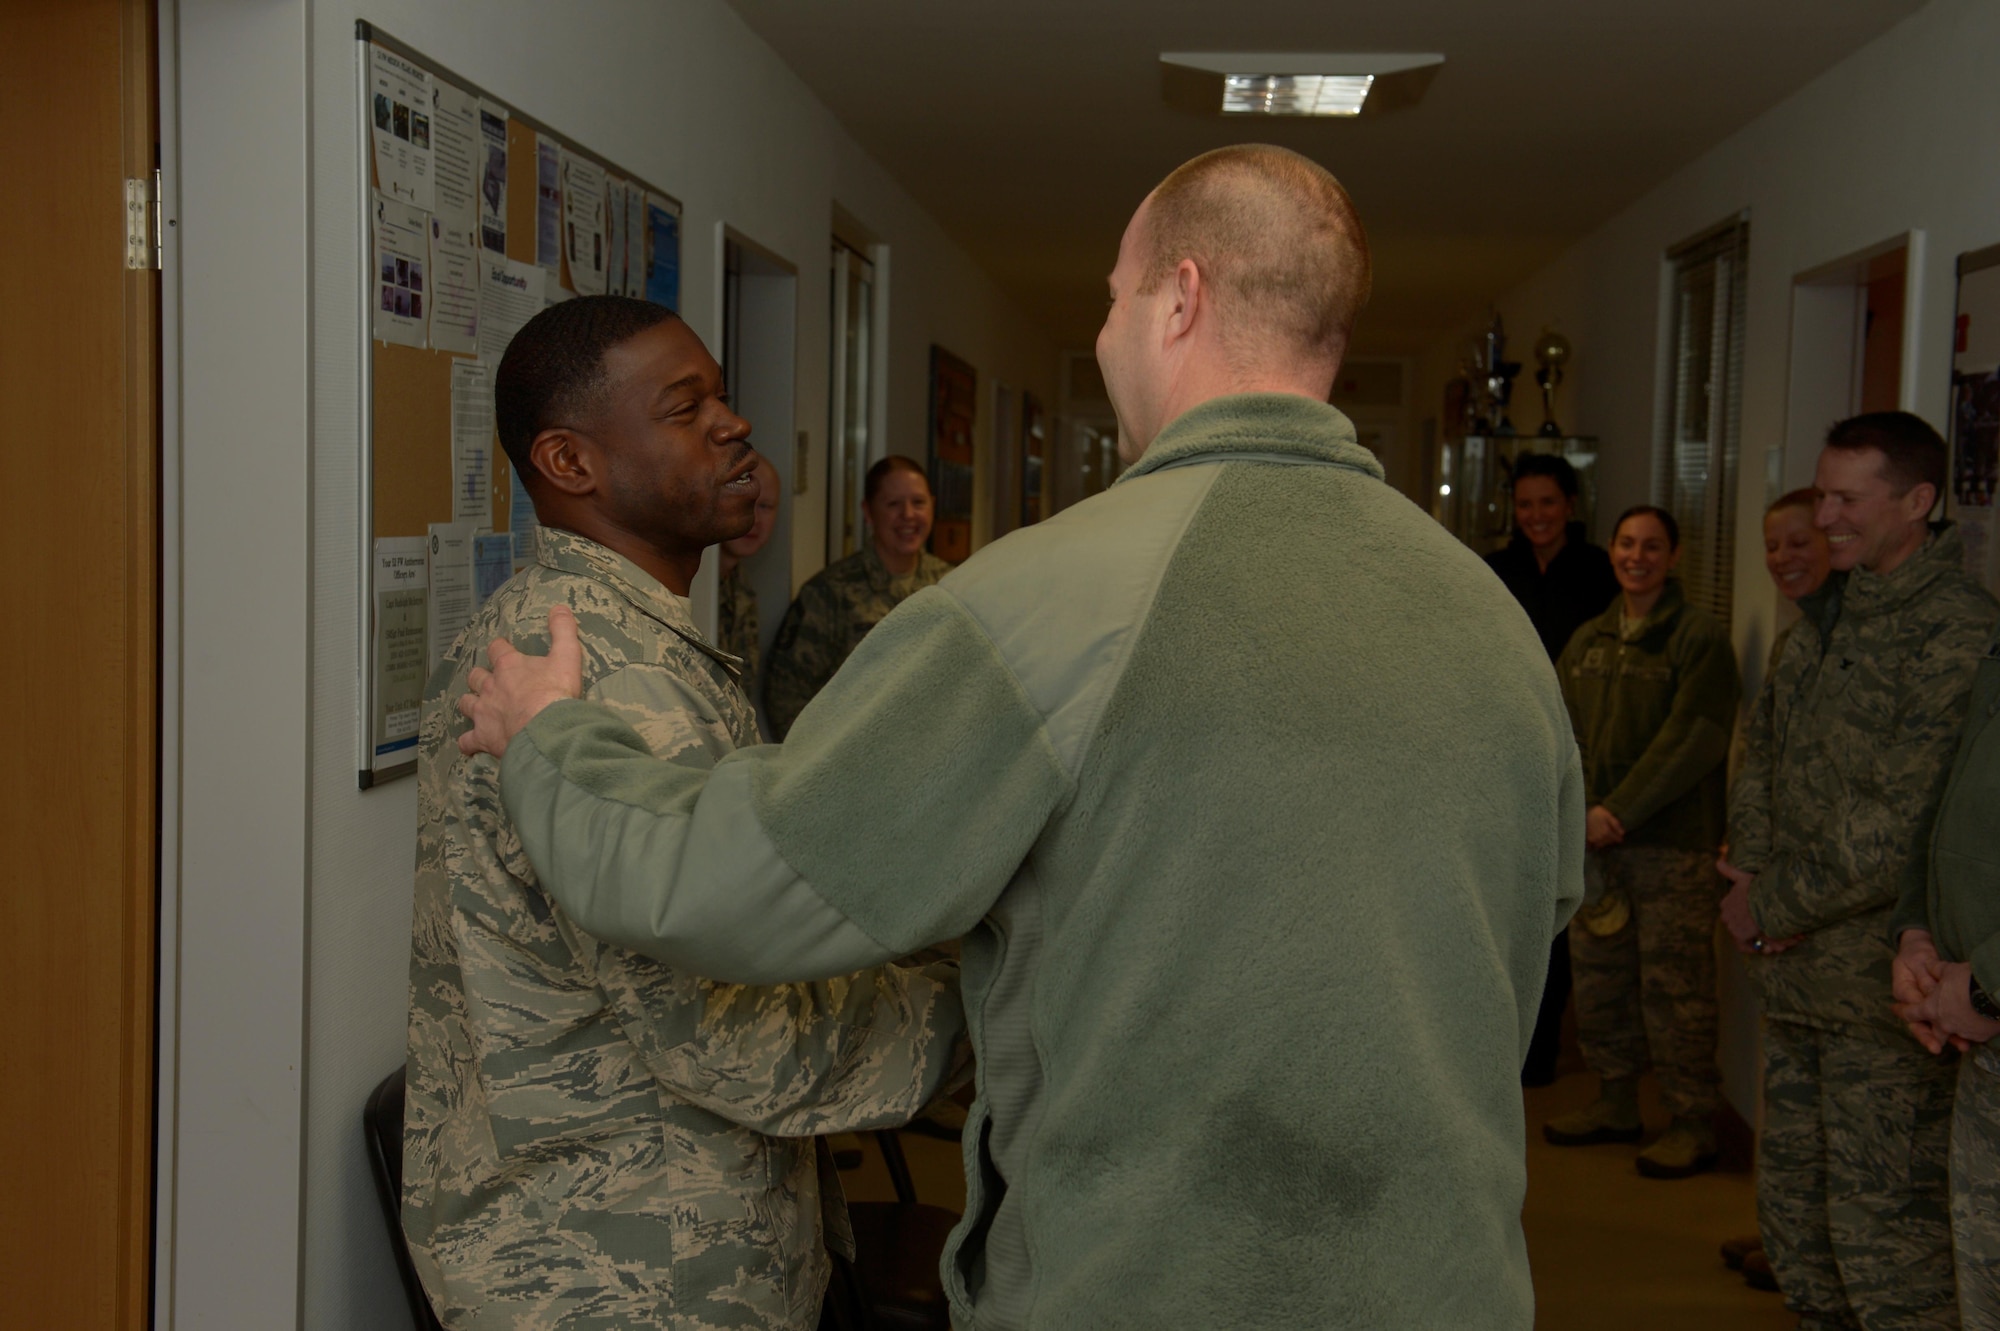 Master Sgt. Jamain Rouse, 52nd Force Support Squadron first sergeant, is coined by Chief Master Sgt. Edwin Ludwigsen, 52nd Fighter Wing command chief, for his actions in a Green Dot social experiment at Spangdahlem Air Base, Germany, Jan. 11, 2017. Green Dot has been conducting several scenarios around base to see how individuals will react to the actors. (U.S. Air Force photo by Staff Sgt. Jonathan Snyder)